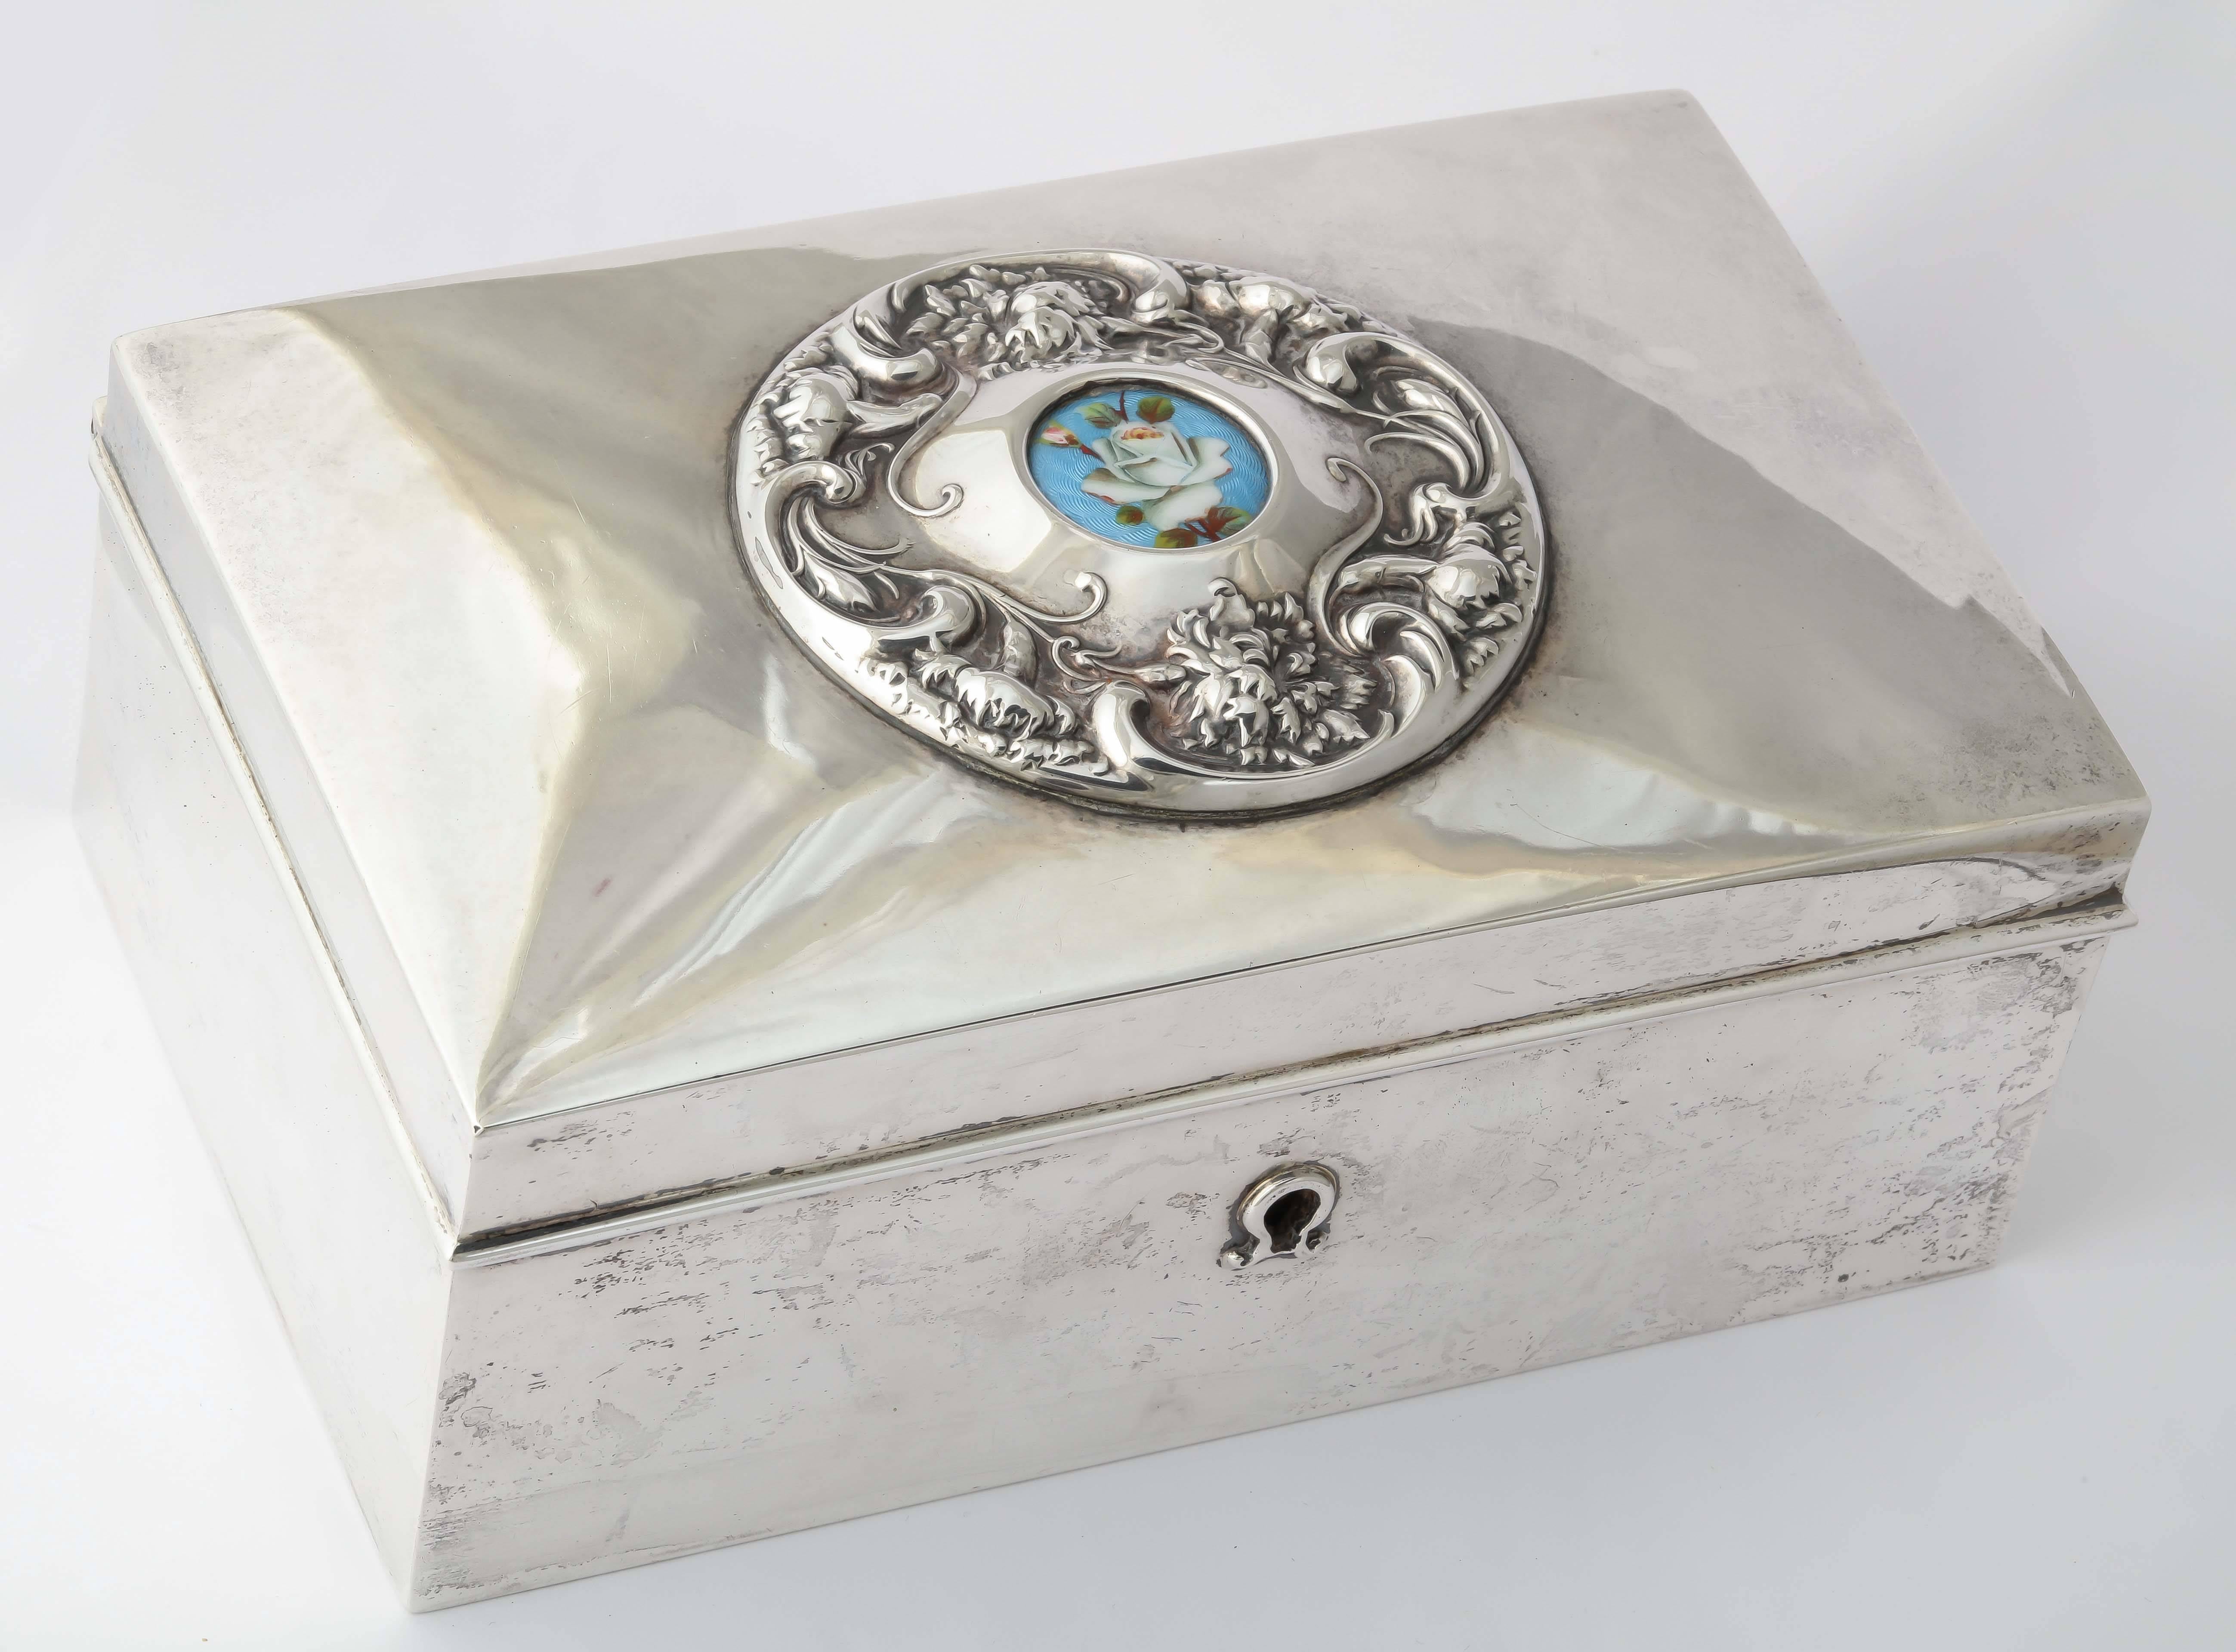 A beautiful rectangular love letter box made of heavy gauge silver and inset with a key hole, the cover decorated with a circular raised foliate motif enclosing an enamelled white rose on blue guilloché enamelled ground. 

By Meriden-Brittania